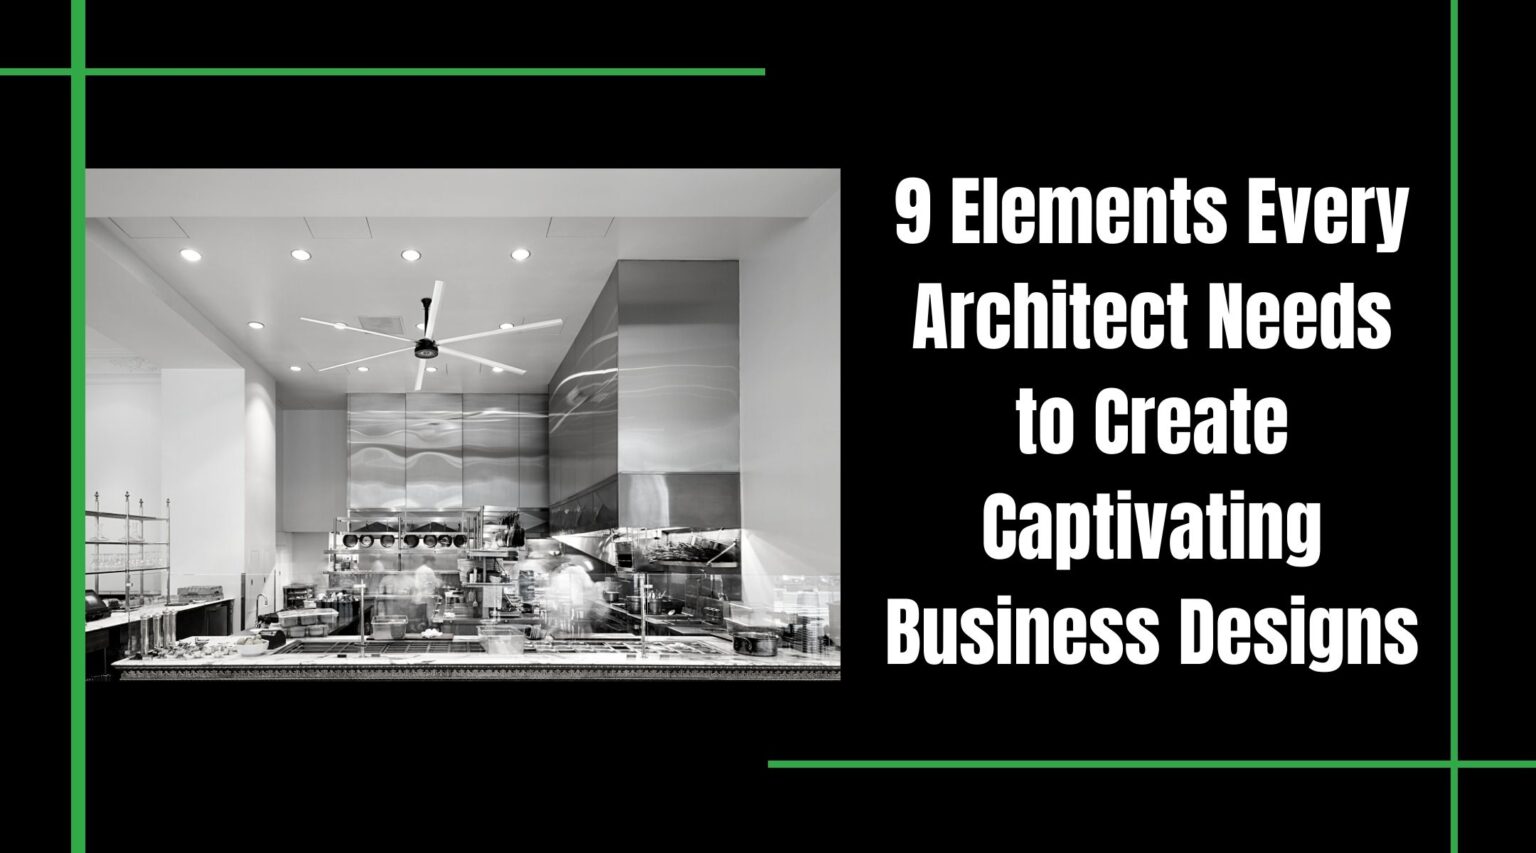 9 Elements Every Architect Needs to Create Captivating Business Designs